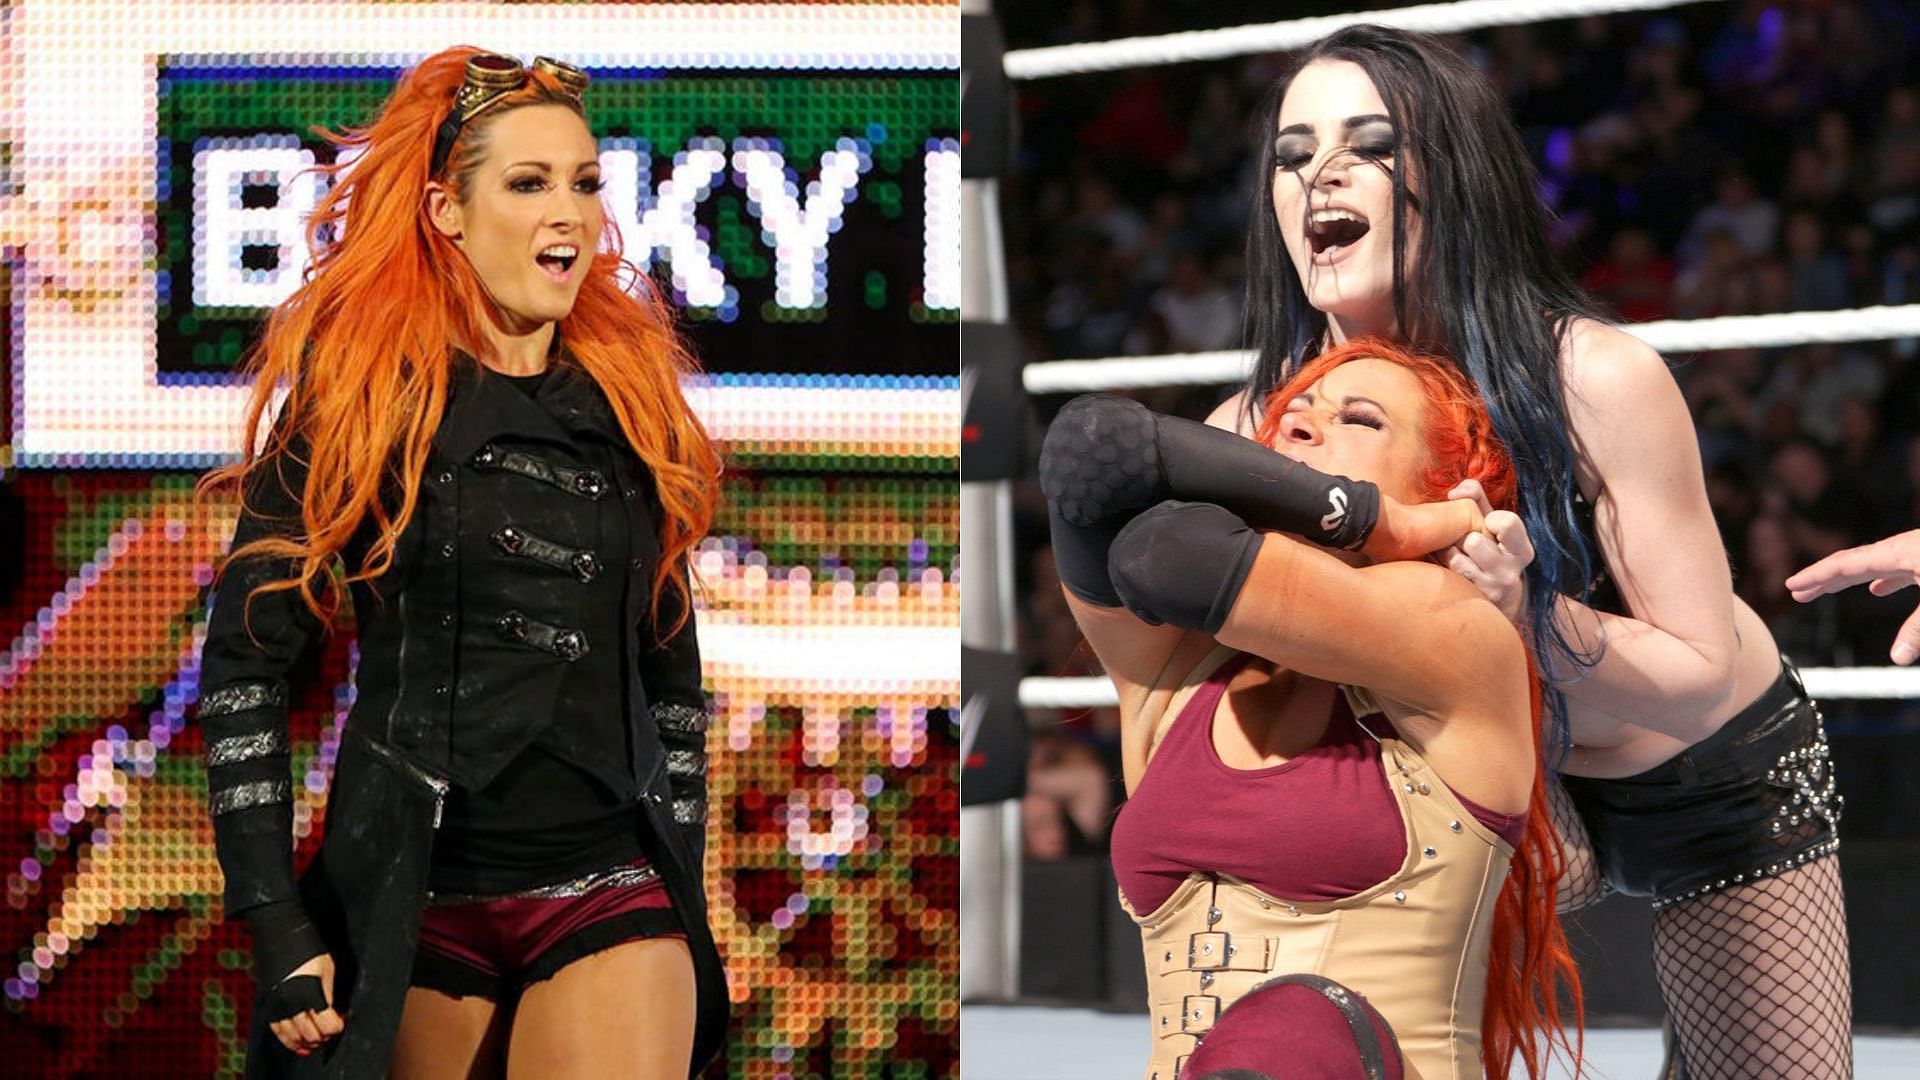 Becky Lynch was tag team partners with Charlotte Flair and Paige in 2015.